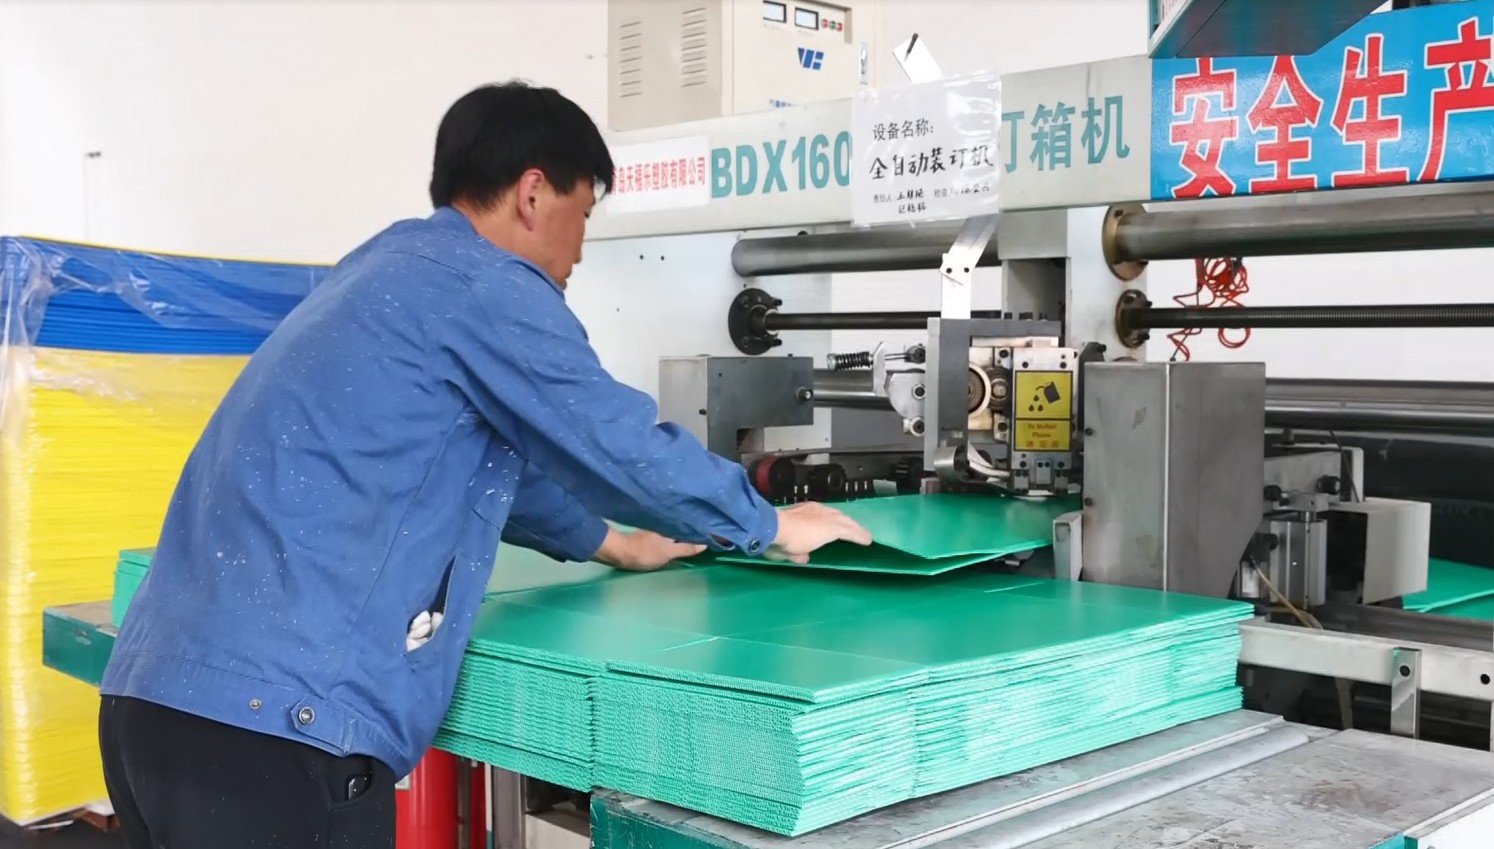 The company's advanced PP hollow board packaging box process